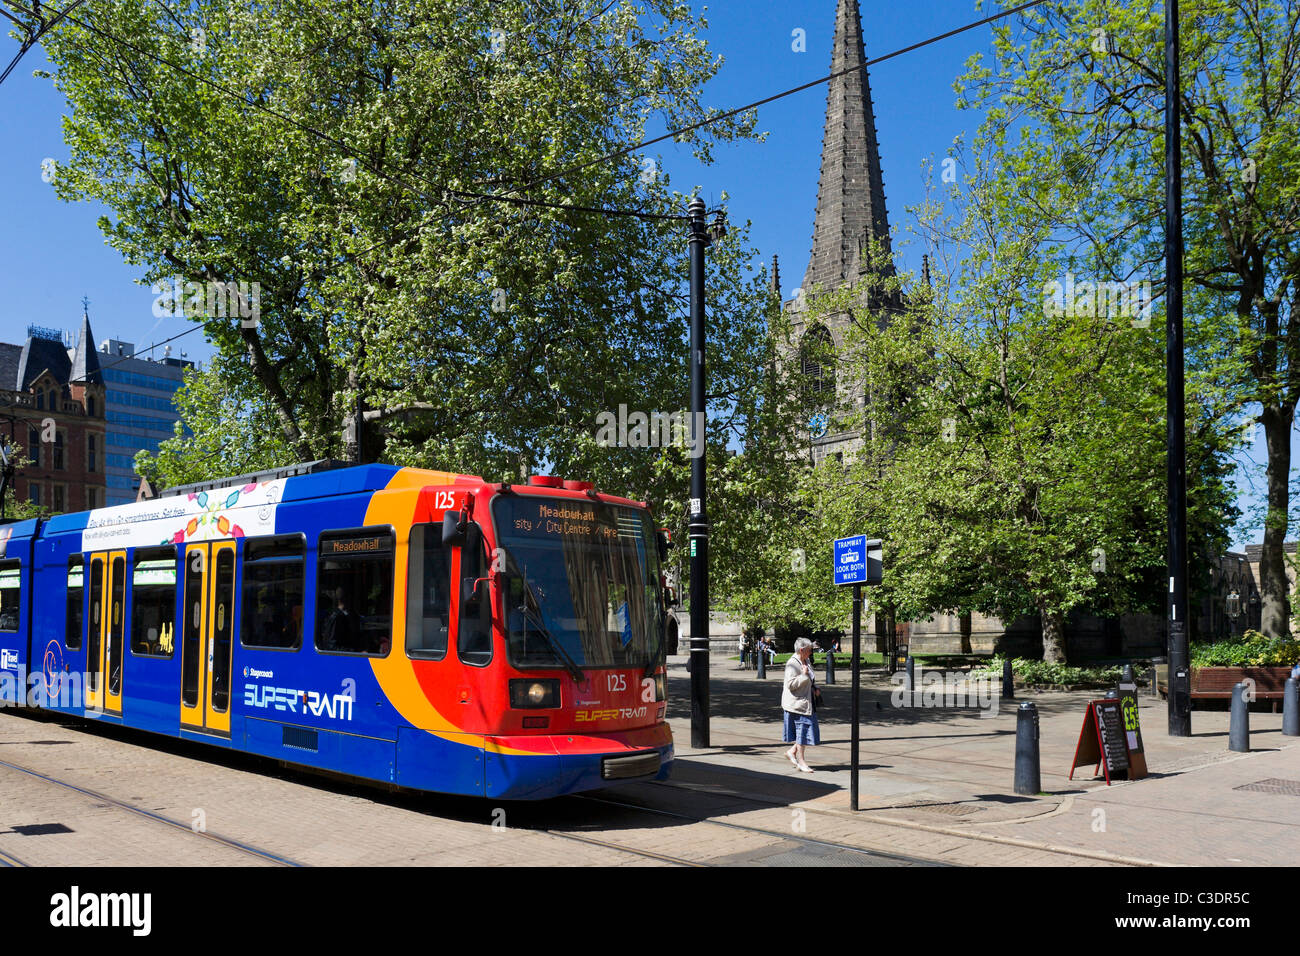 Supertram in front of the Cathedral (Cathedral Church of St Peter and St Paul), Sheffield, South Yorkshire, UK Stock Photo